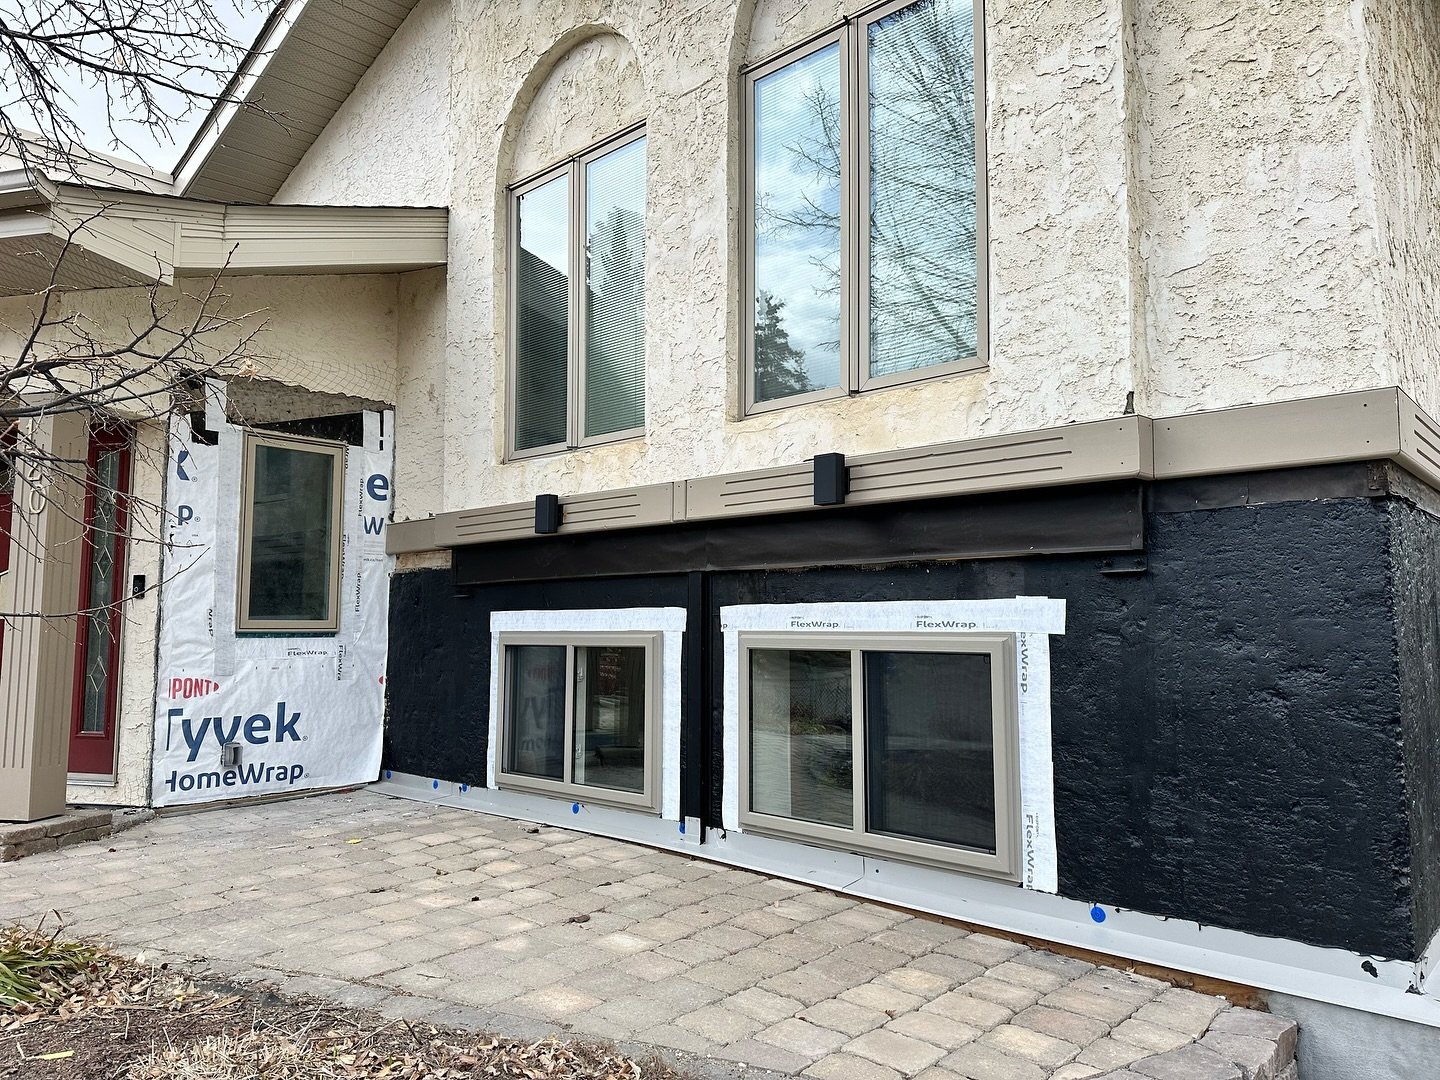 I was invited to Oakridge to assist these homeowners with stucco color selection.

The previous owners added windows that were too large with no support making the walls sink and crack. Resulting in exterior damage.

To the rescue with a great color 